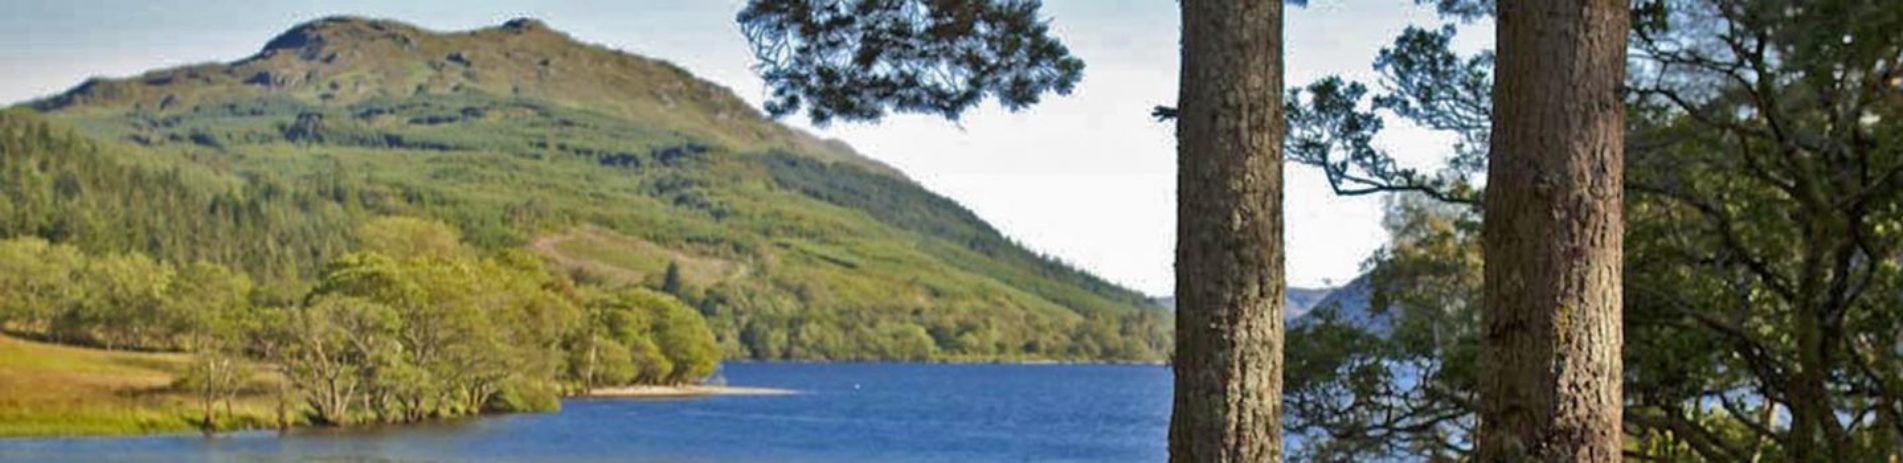 view-of-loch-long-and-hills-from-behind-pine-tree-trunks-blue-skies